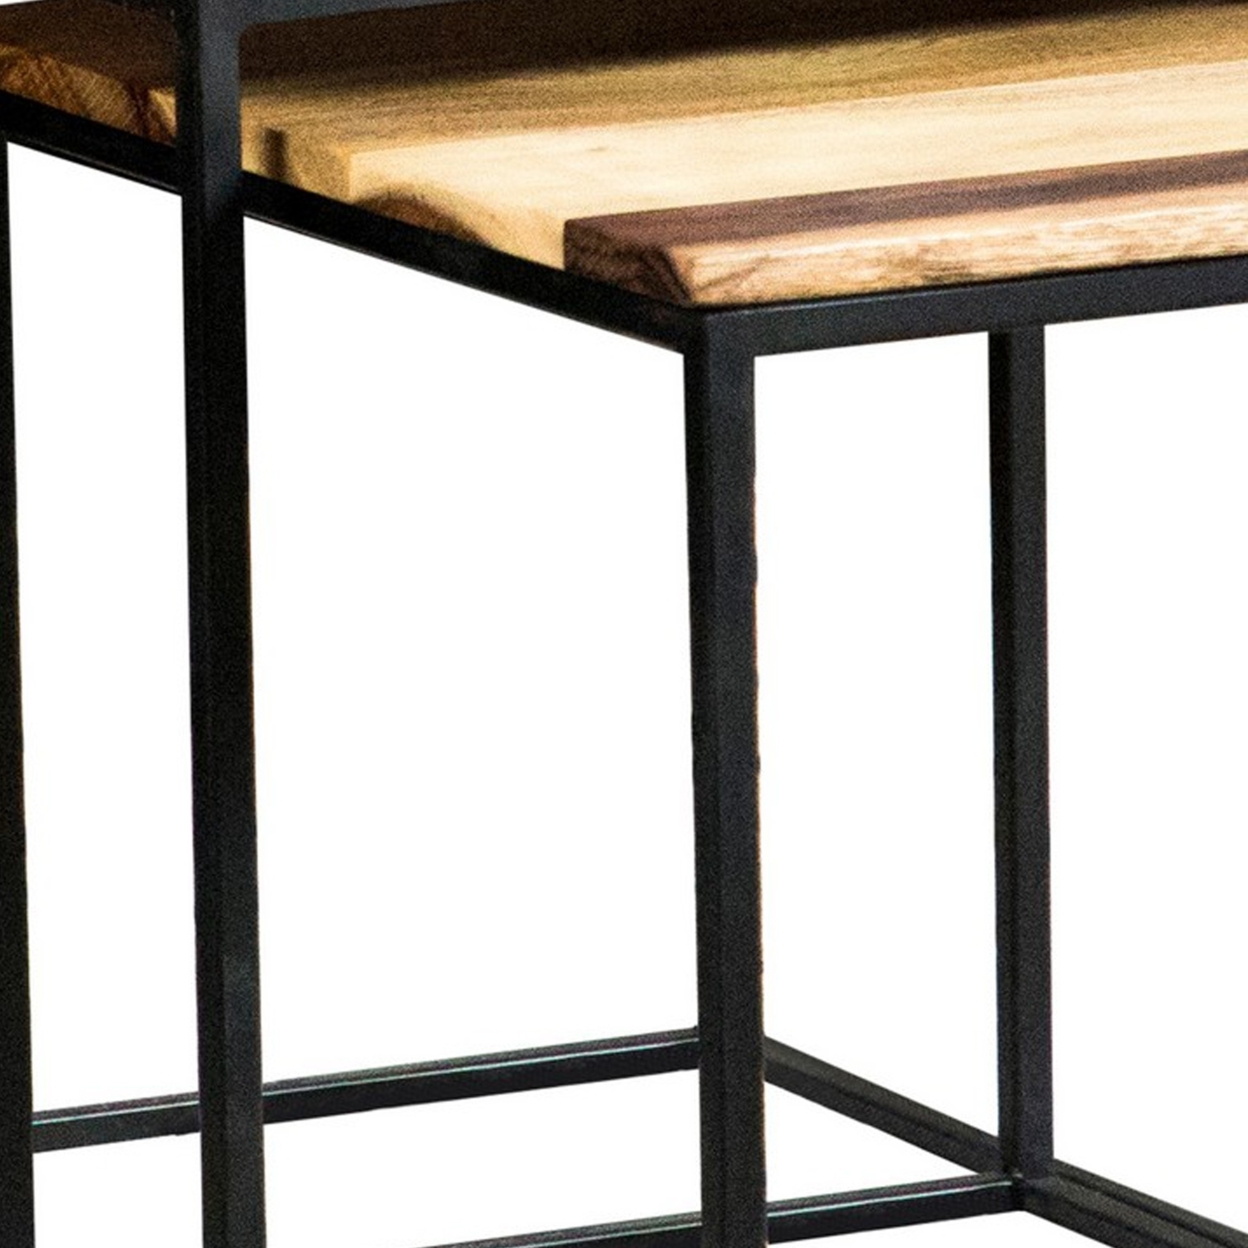 20, 18, 16 Inch 3 Piece Modern Nesting End Table Set, Brown Wood, Black